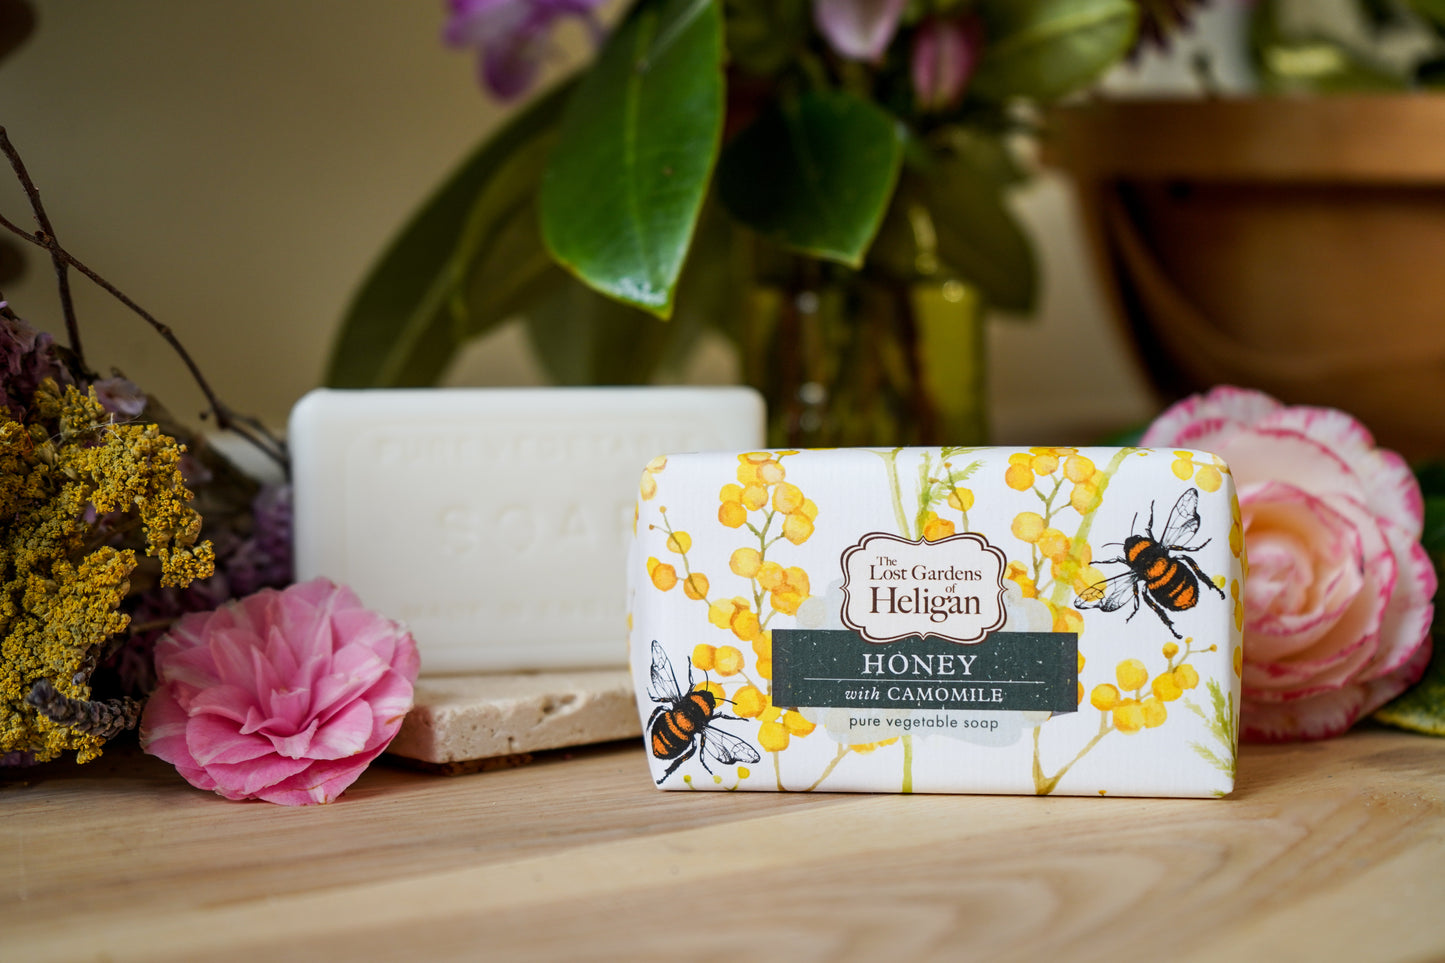 Honey and Camomile Soap Bar